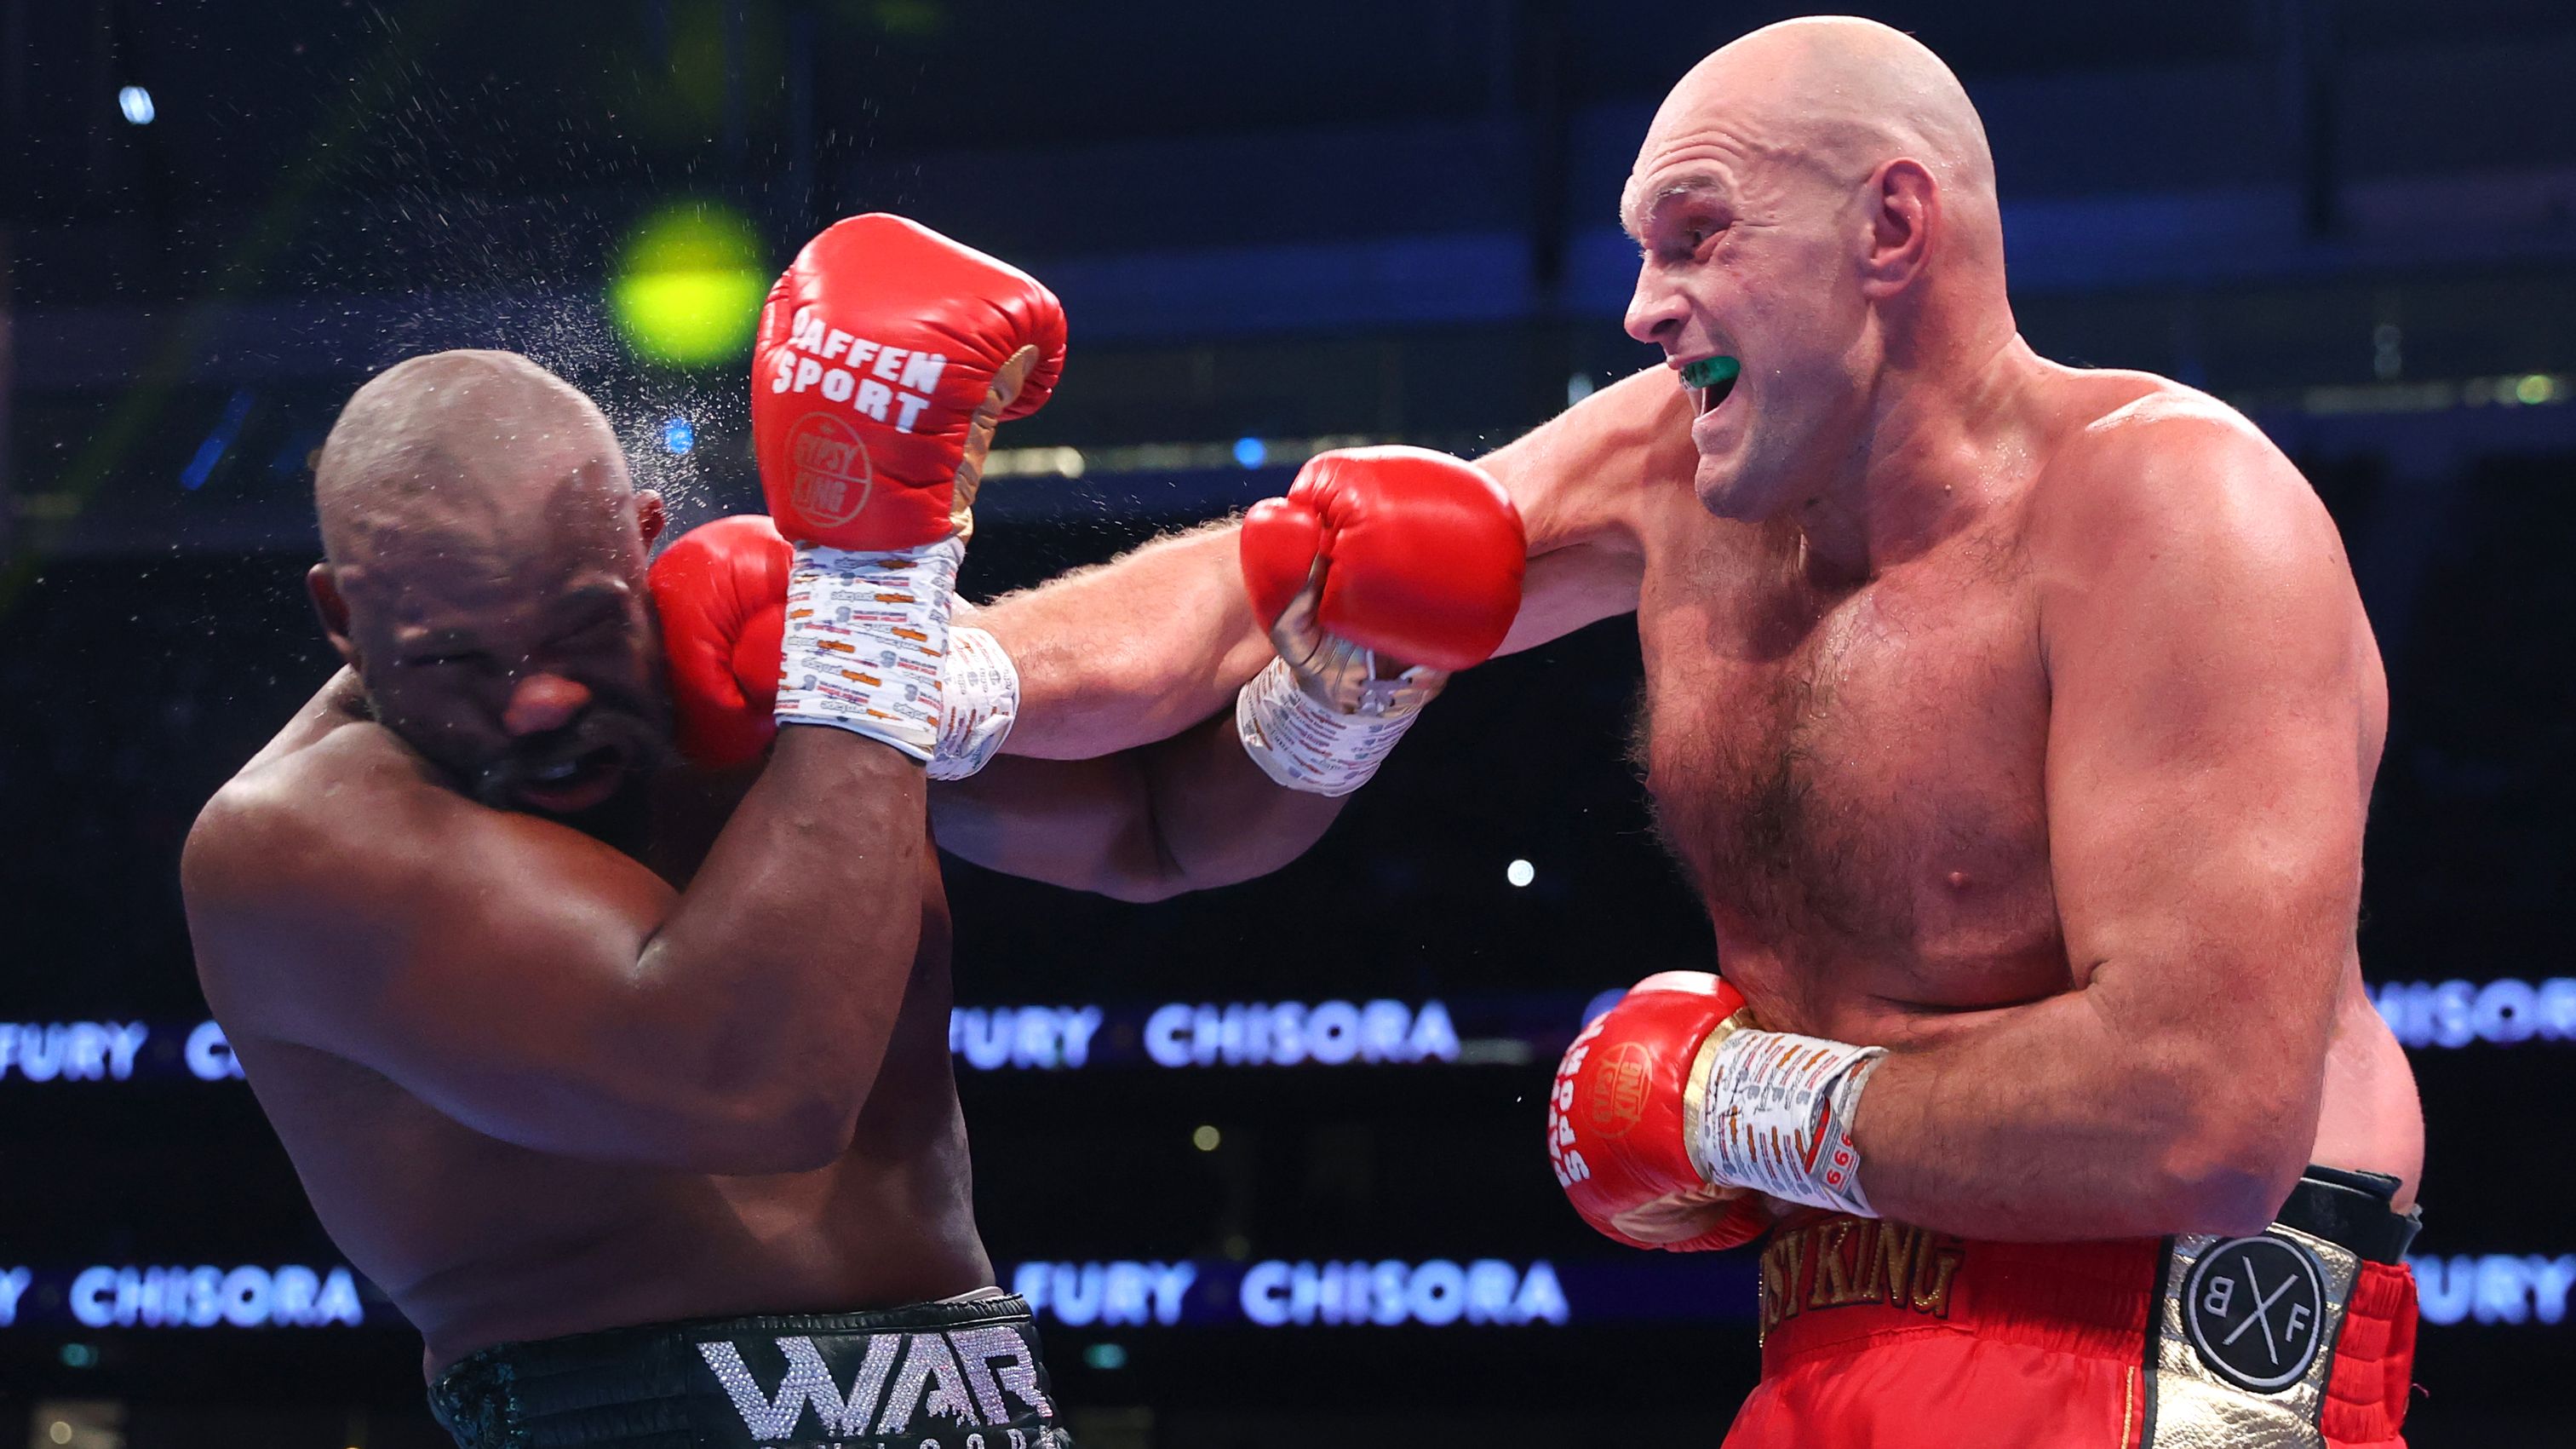 Derek Chisora is punched by Tyson Fury during their WBC heavyweight championship fight, at Tottenham Hotspur Stadium. (Photo by Mikey Williams/Top Rank Inc via Getty Images)